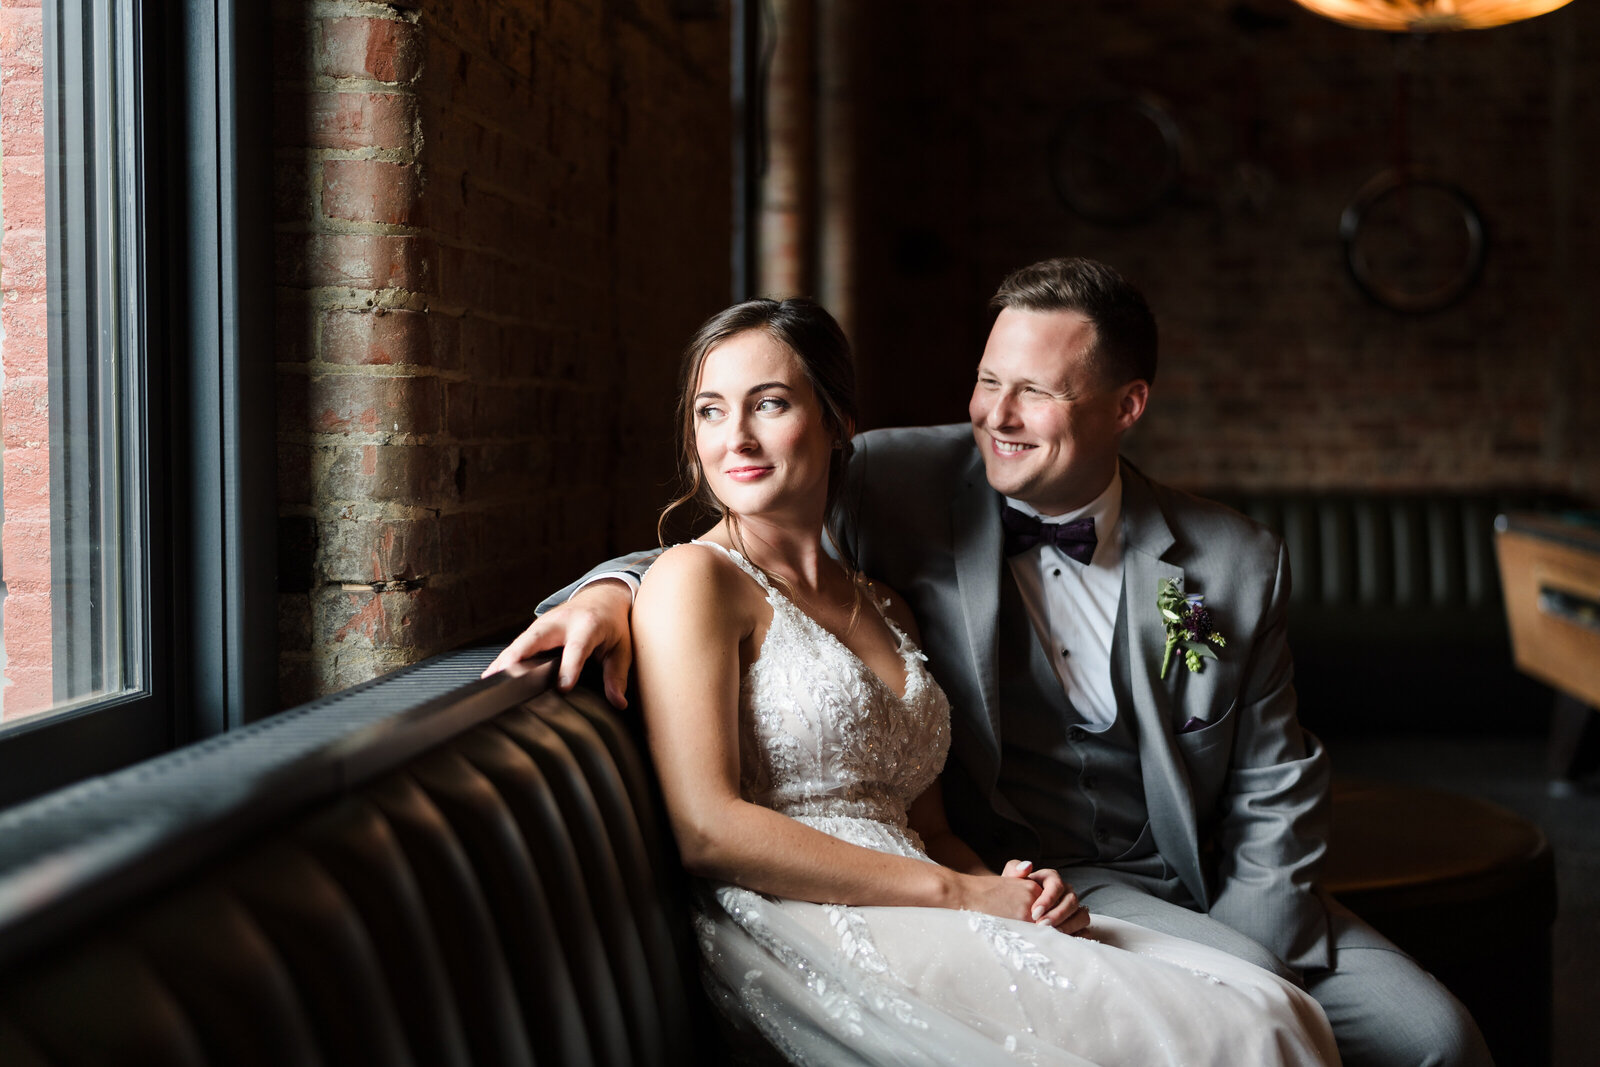 Bride and groom sit on a leather bench and look out the window